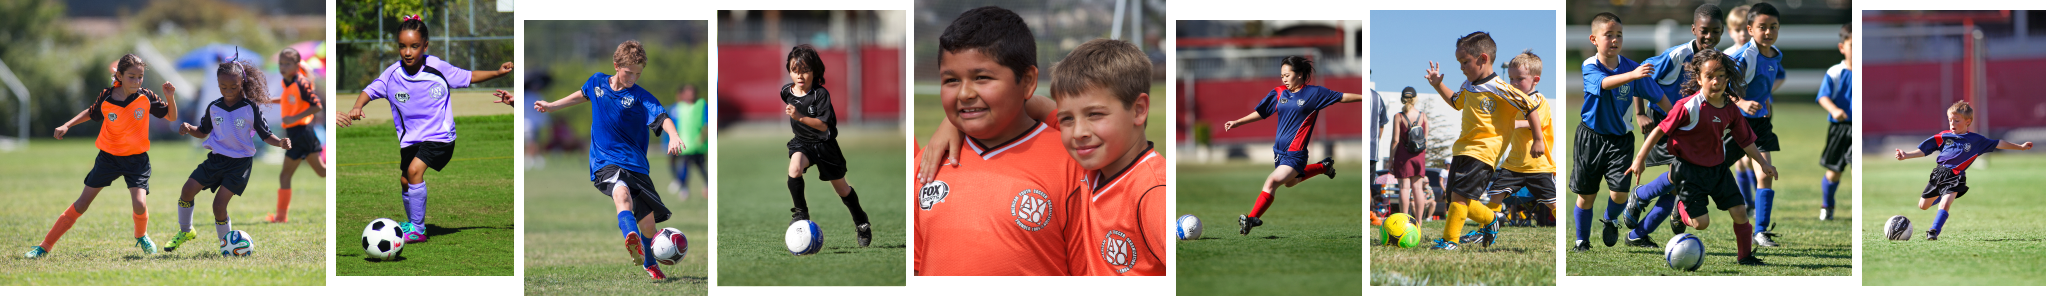 Collage of AYSO players and coaches